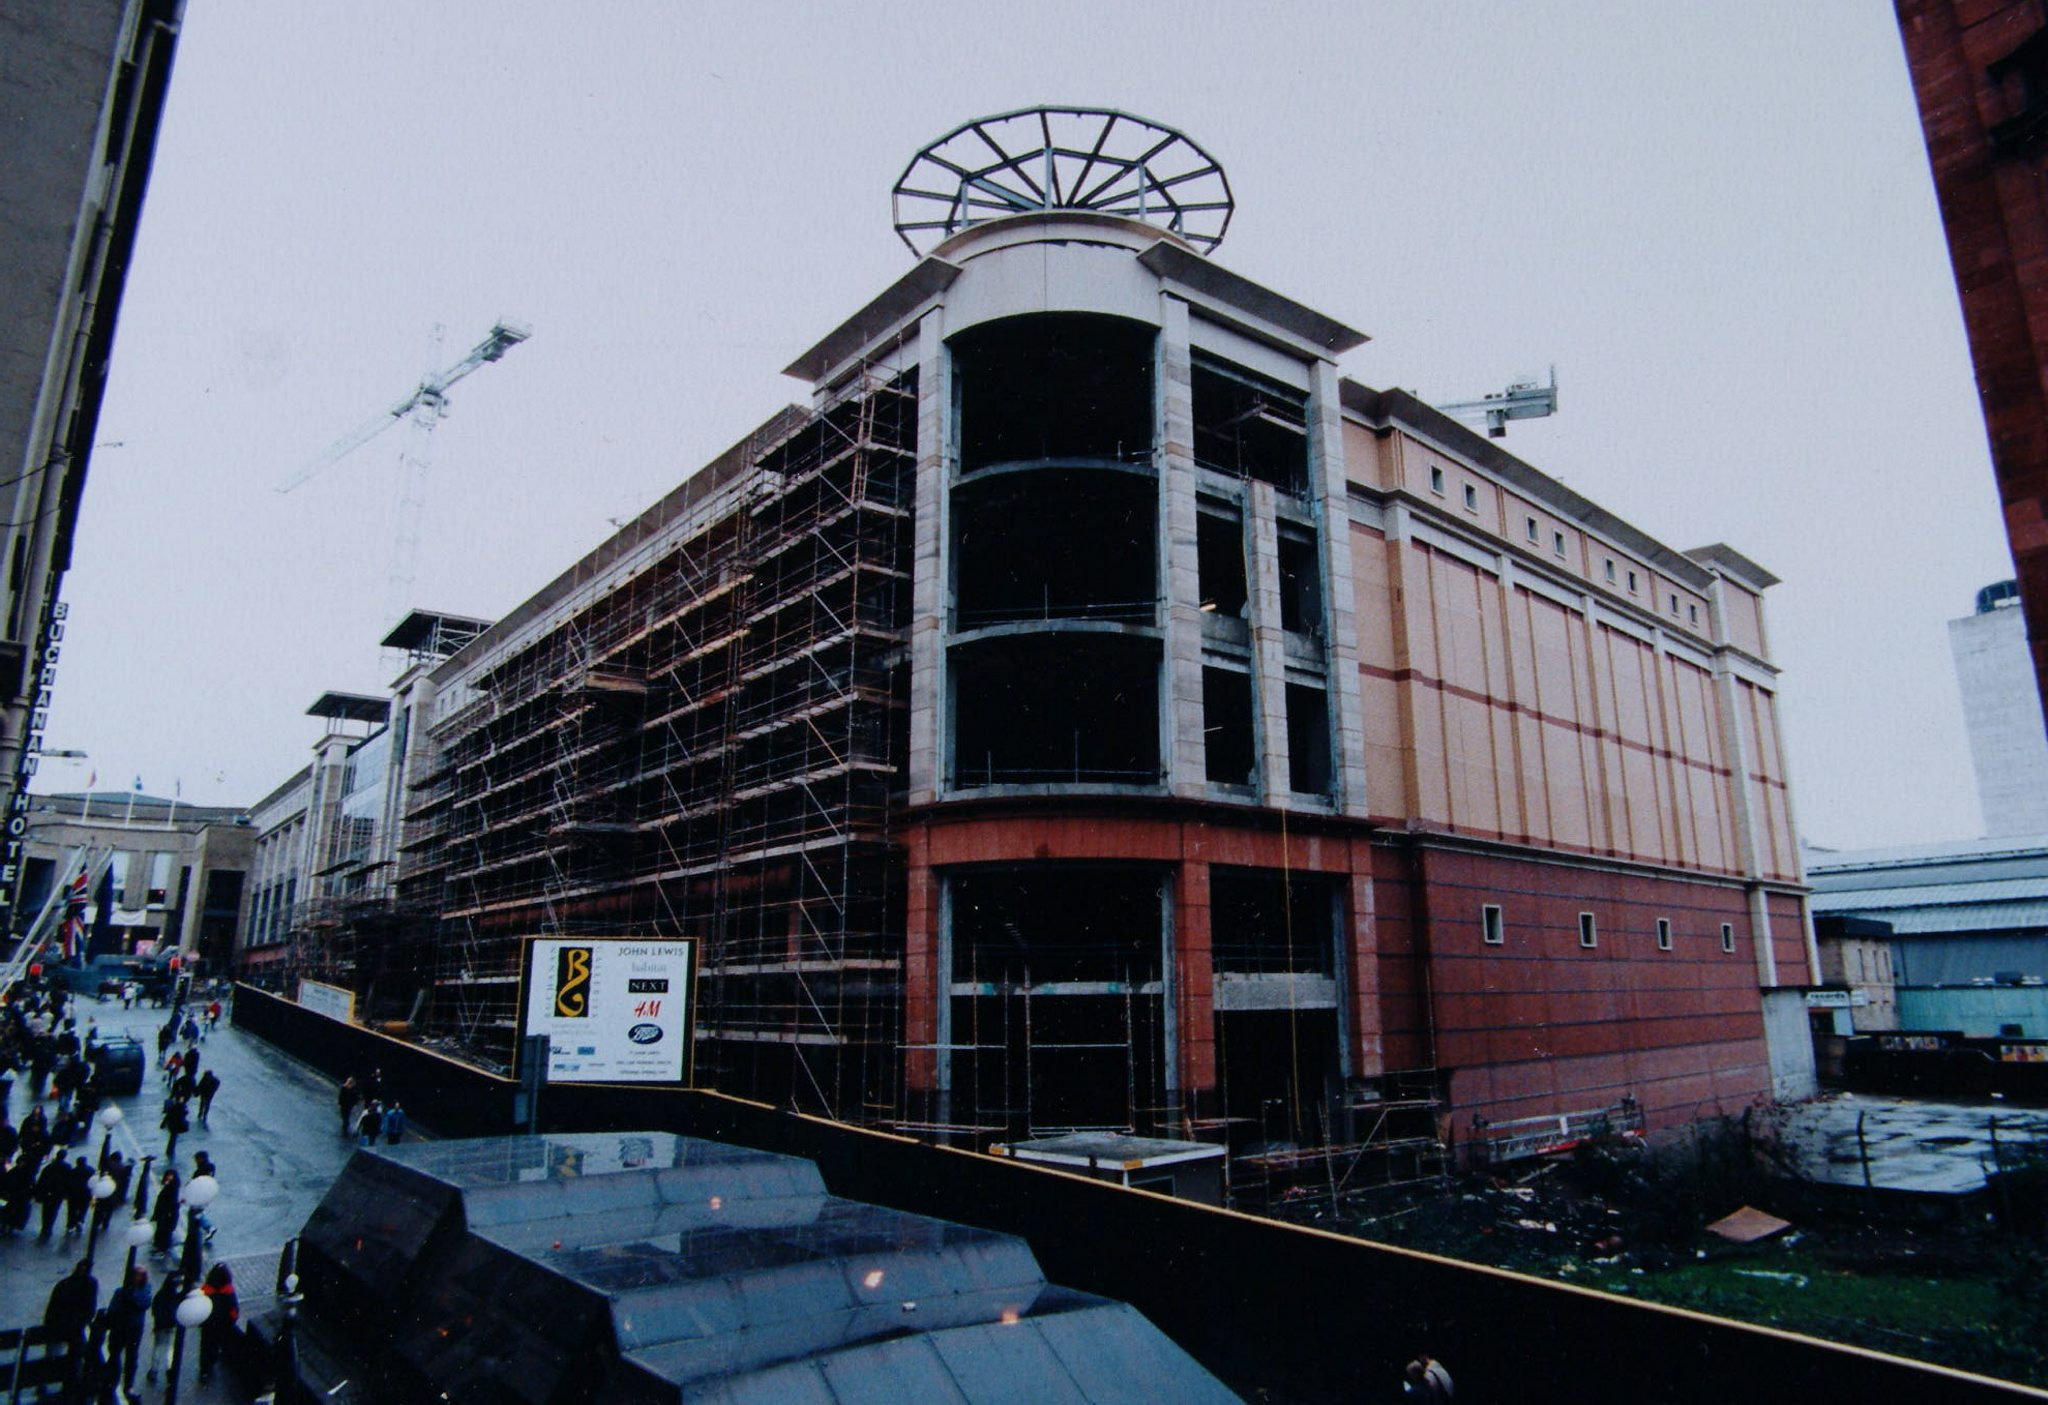 Buchanan Galleries was the biggest retail development in Scotland at the time